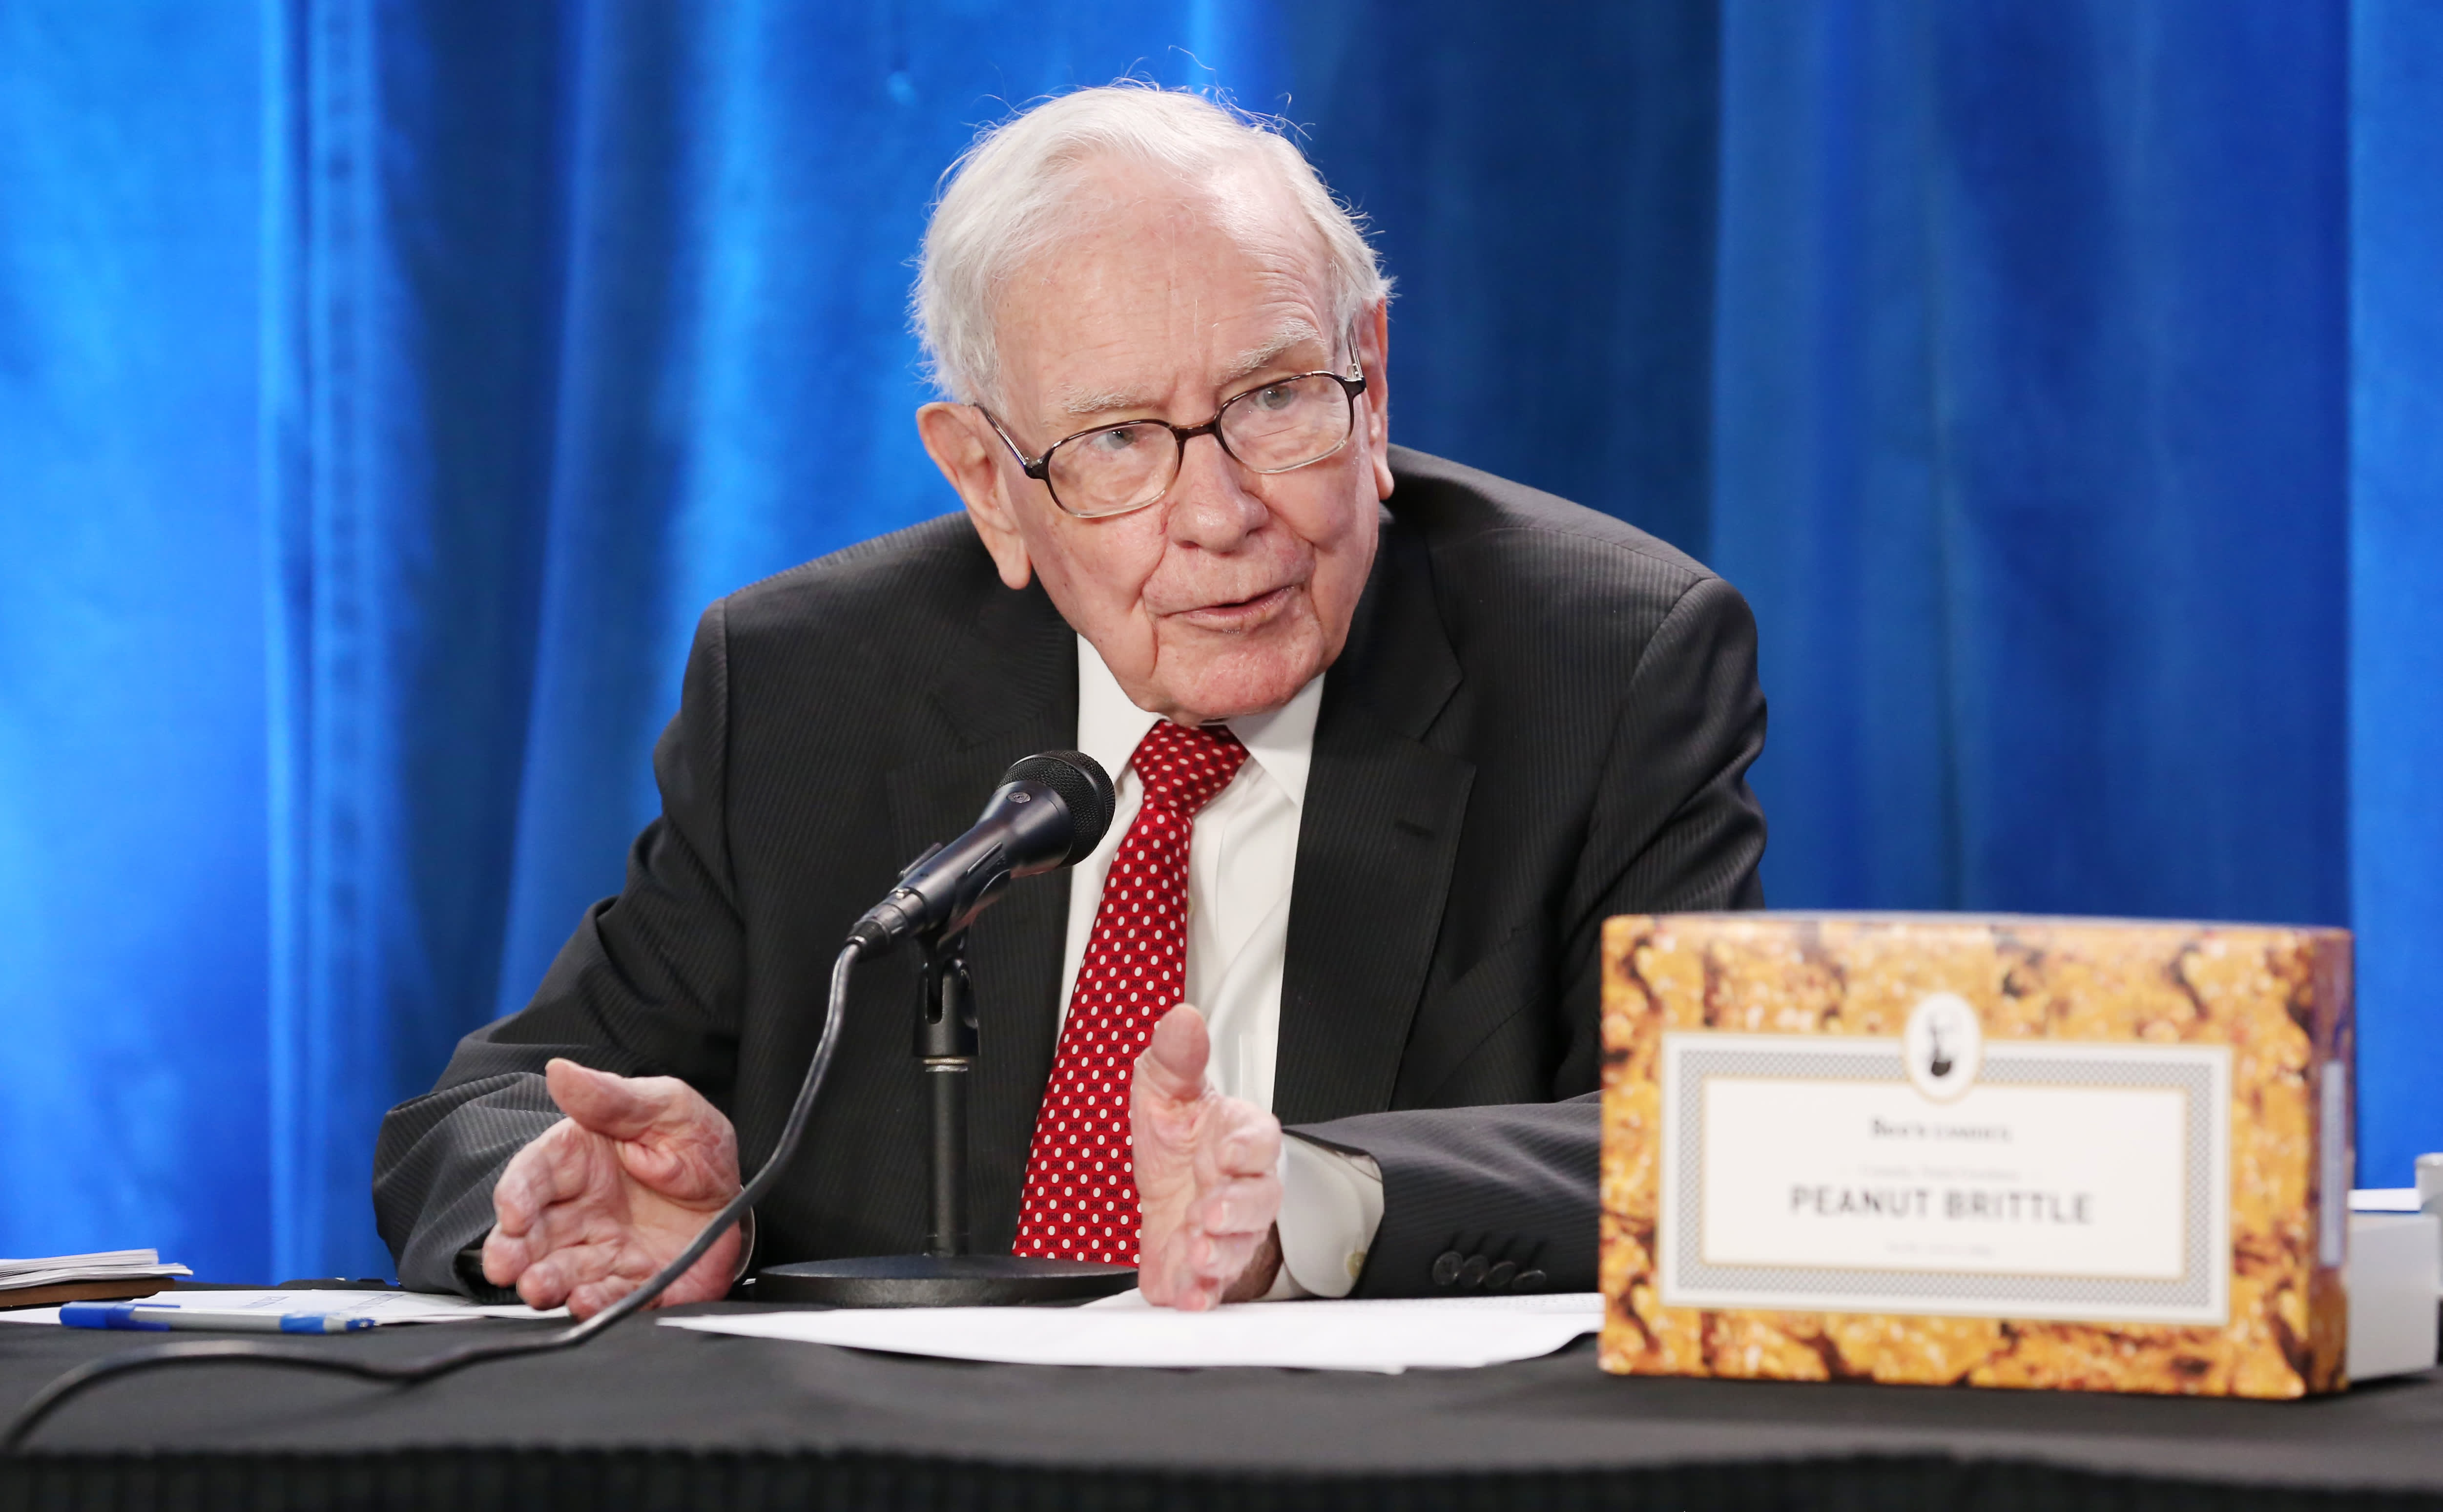 Here are Warren Buffett’s latest stock bets, including a flooring stock and pharma name